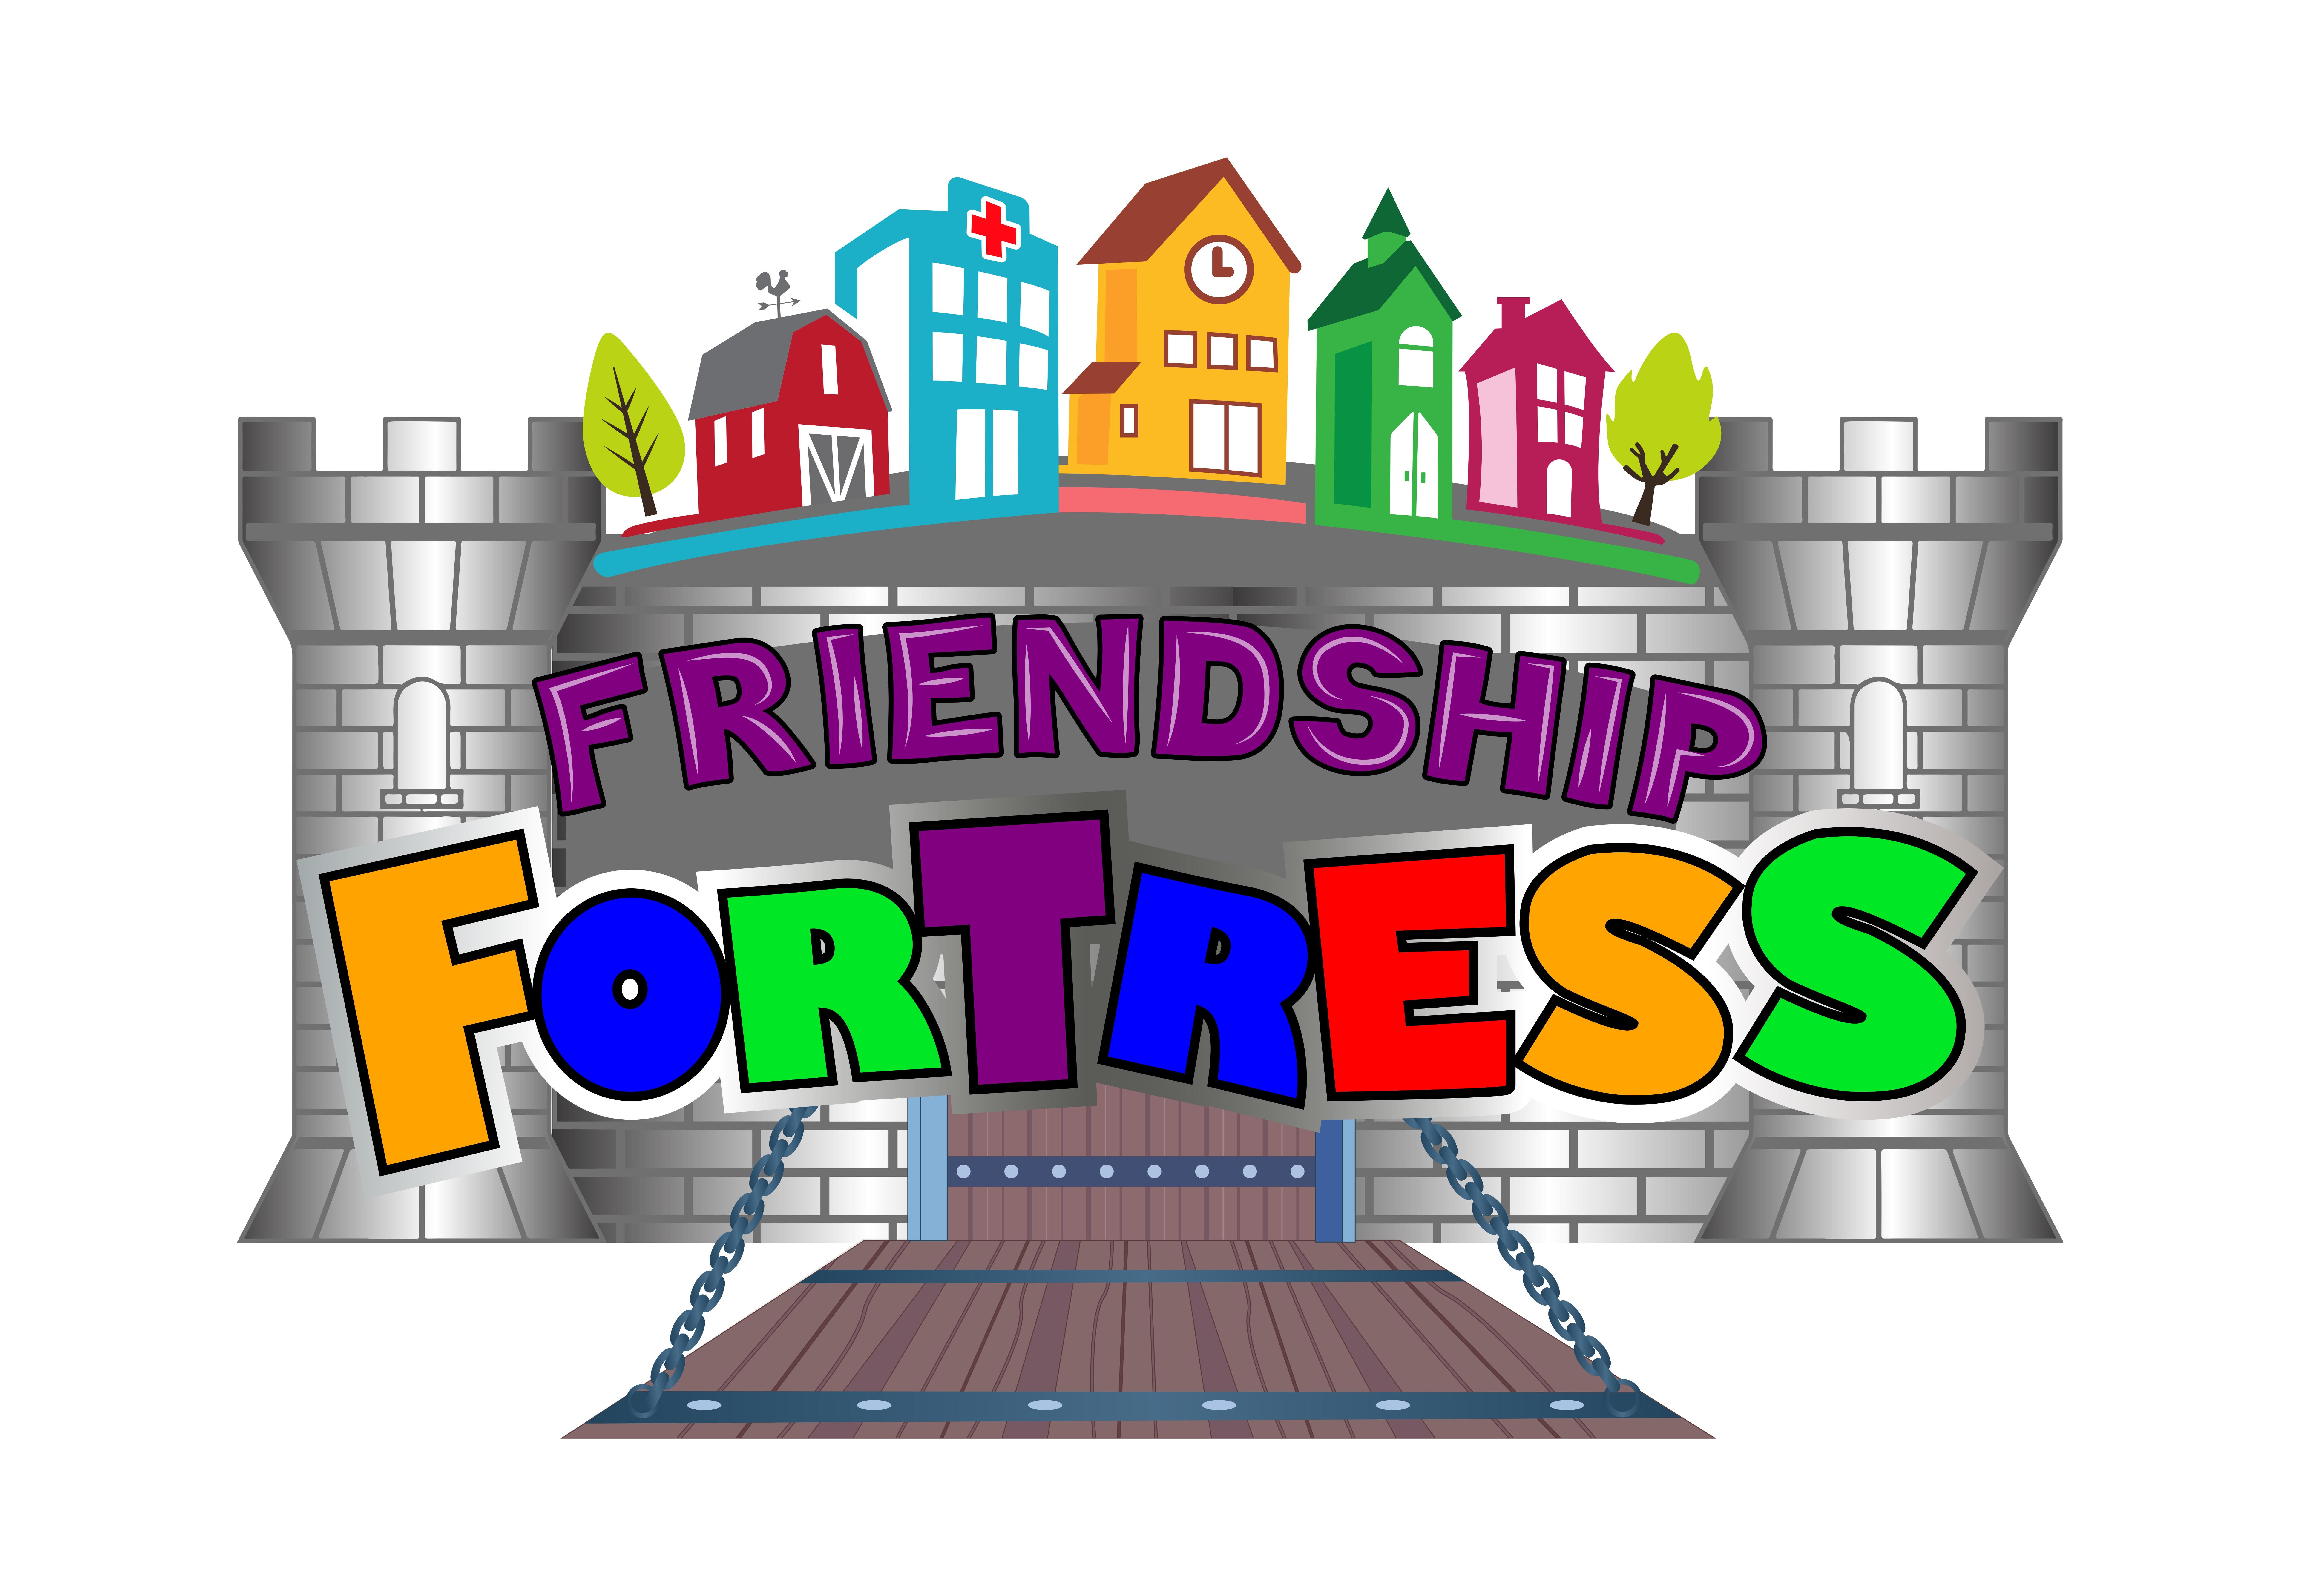 Friendship Fortress Cafe